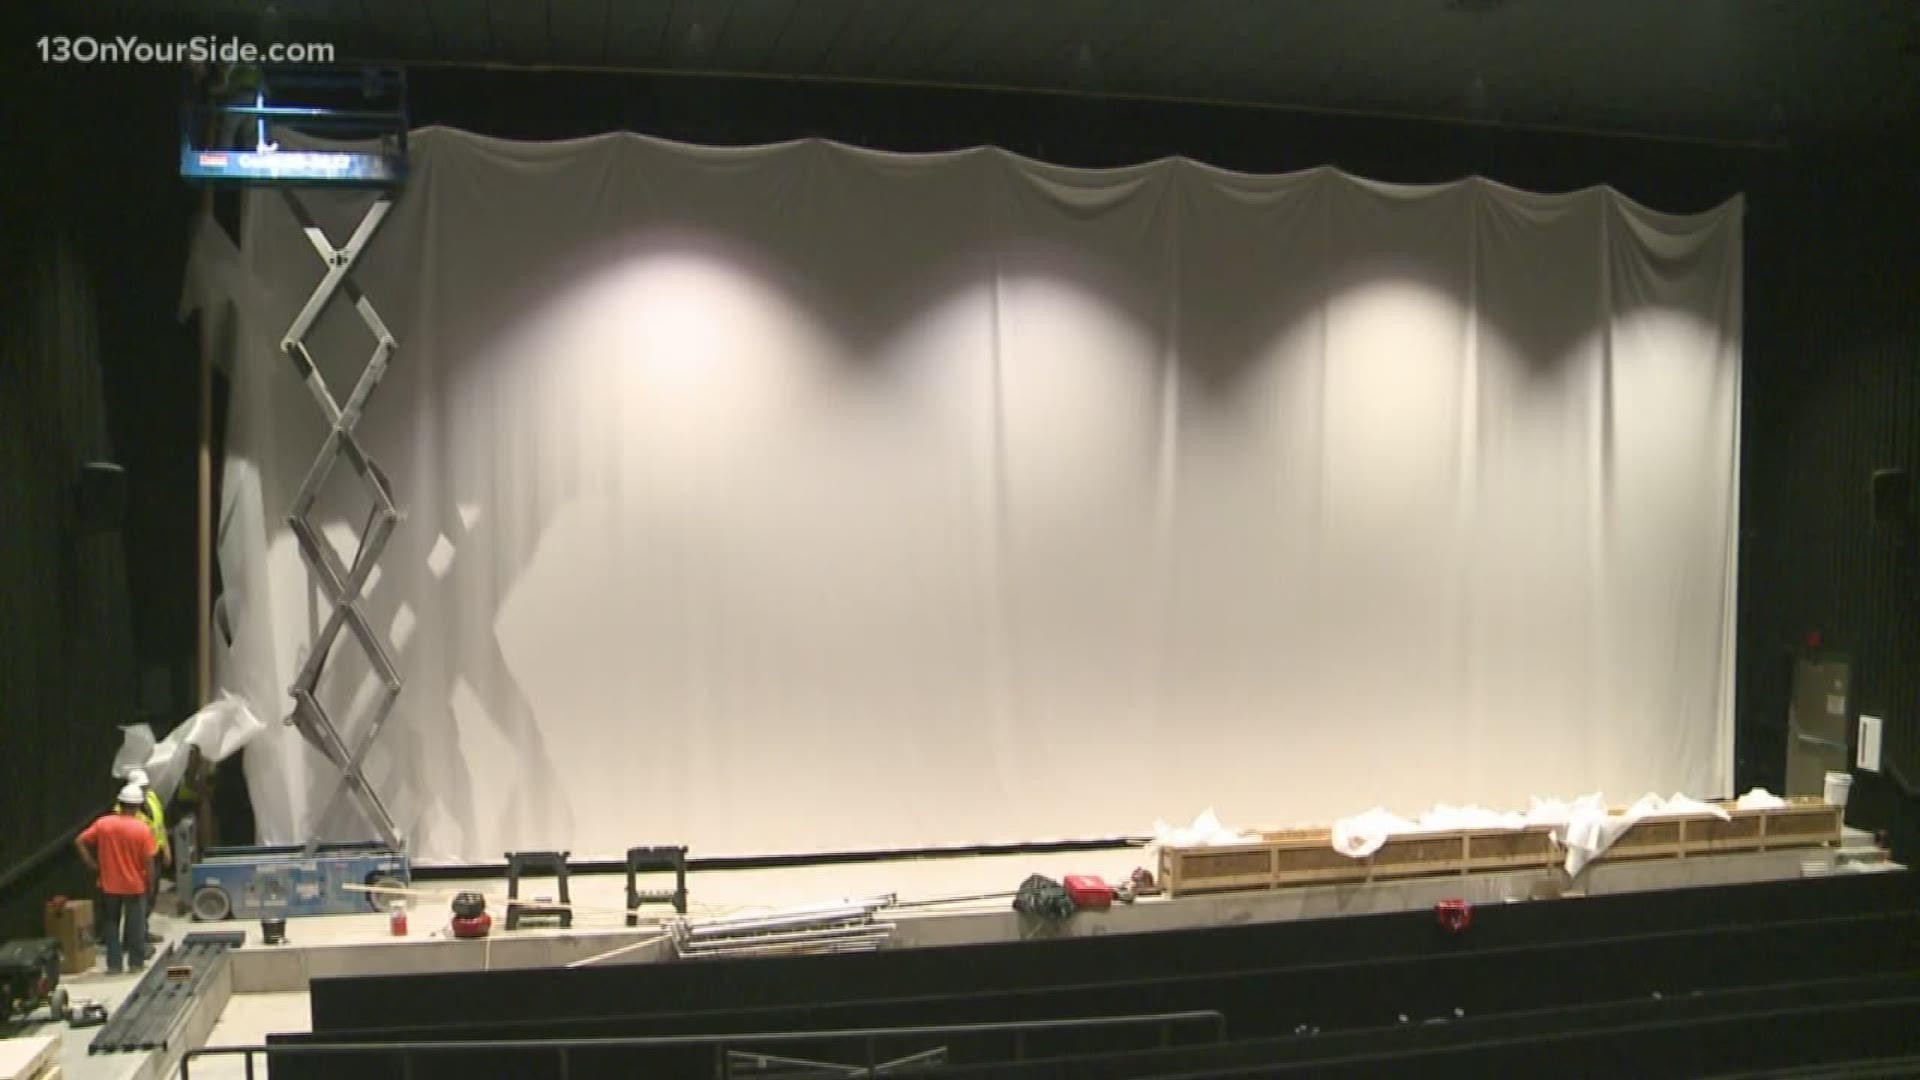 The largest movie screen in West Michigan was installed at the new downtown Grand Rapids movie theater.